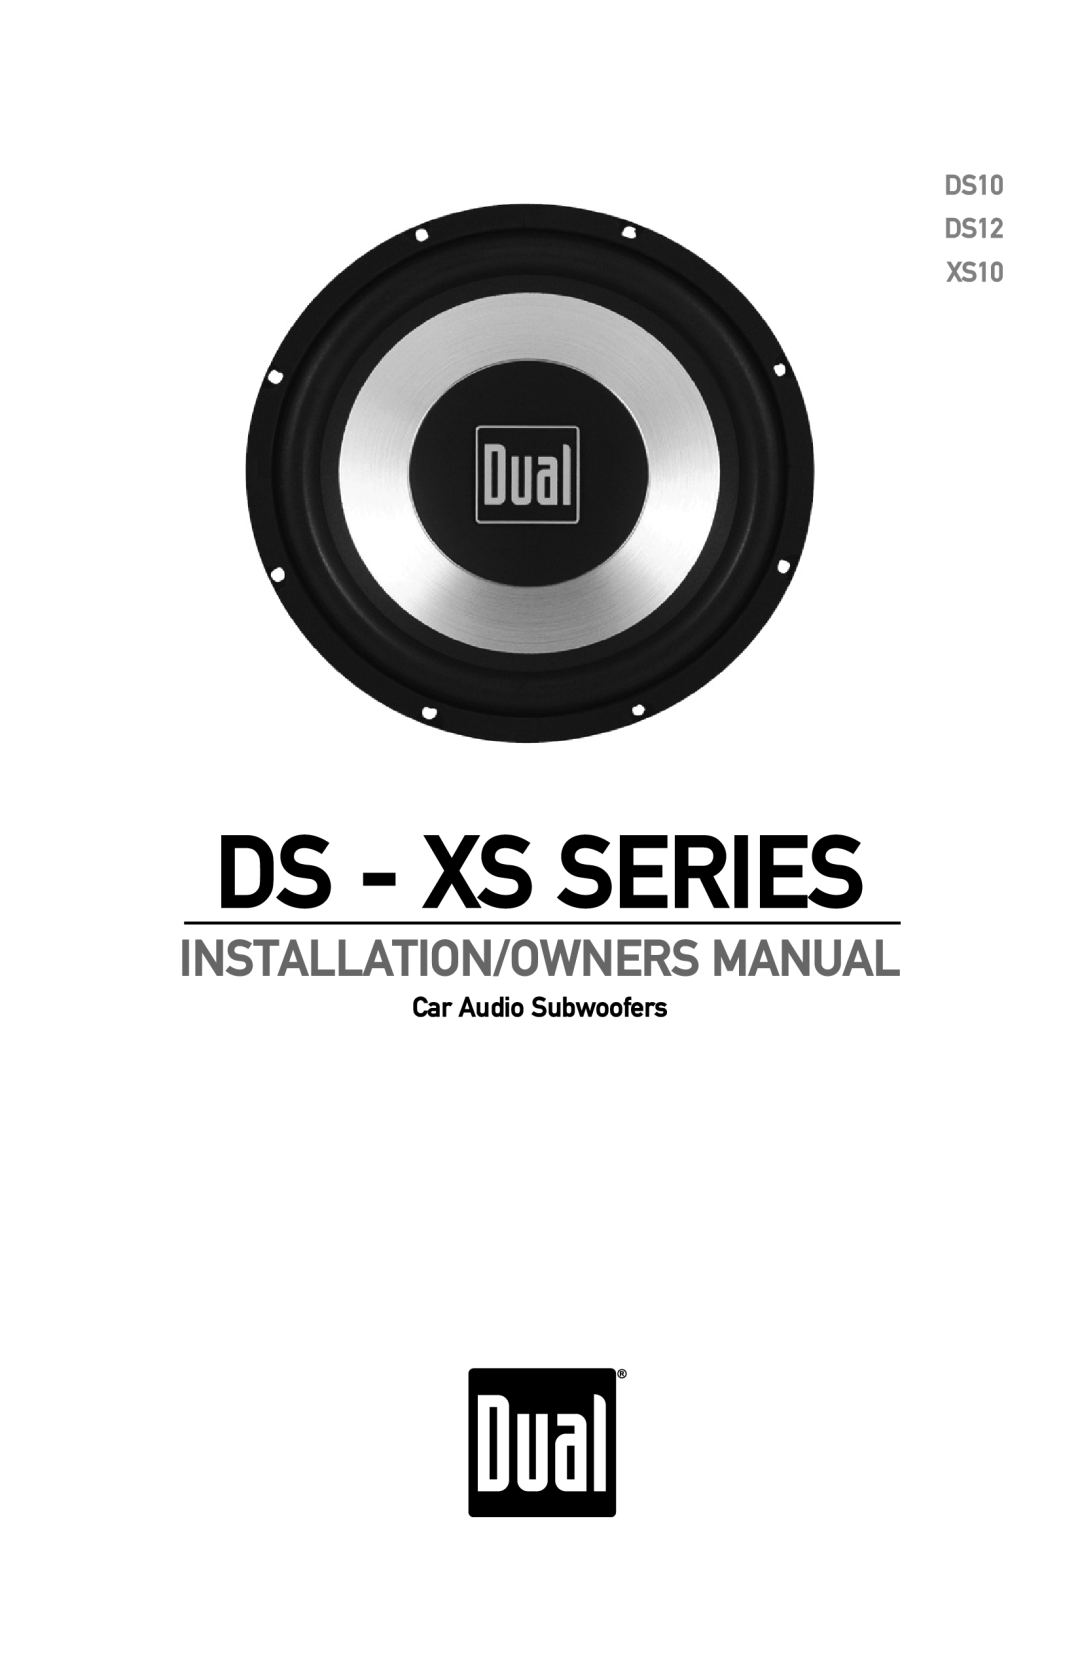 Dual owner manual Ds - Xs Series, DS10 DS12 XS10, Car Audio Subwoofers 